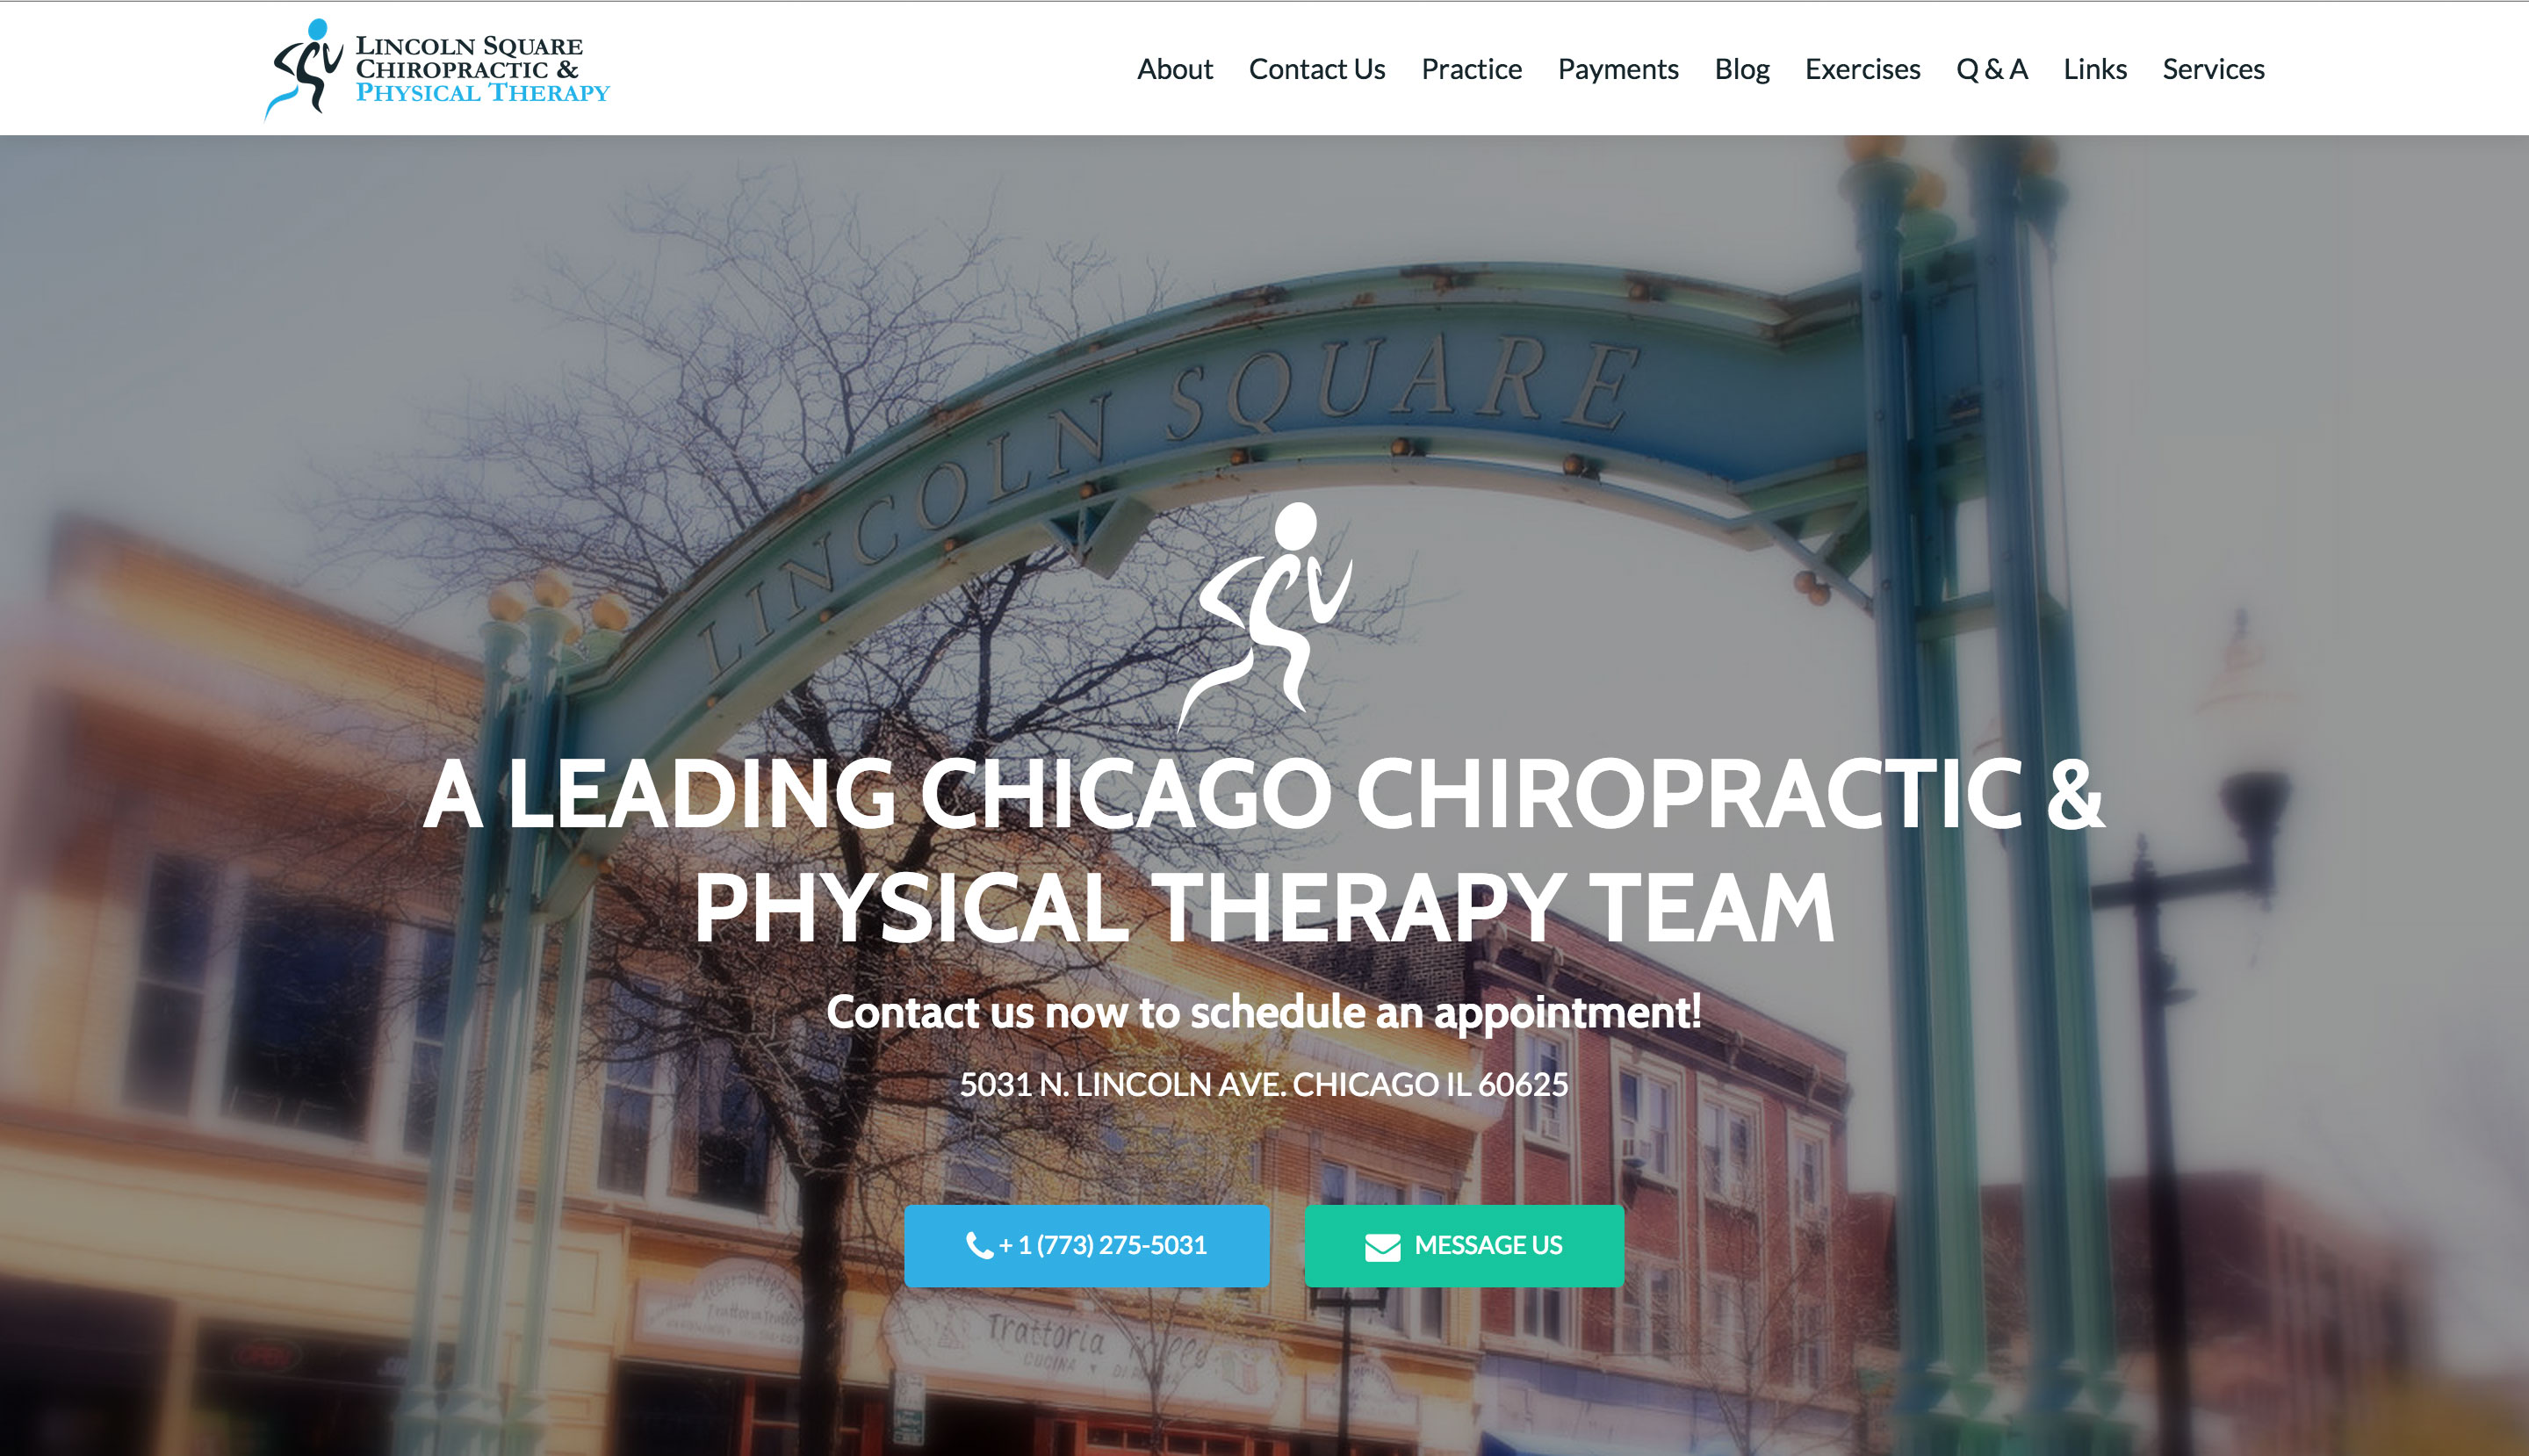 Lincoln Square Chiropractic and Physical Therapy Website After Pic